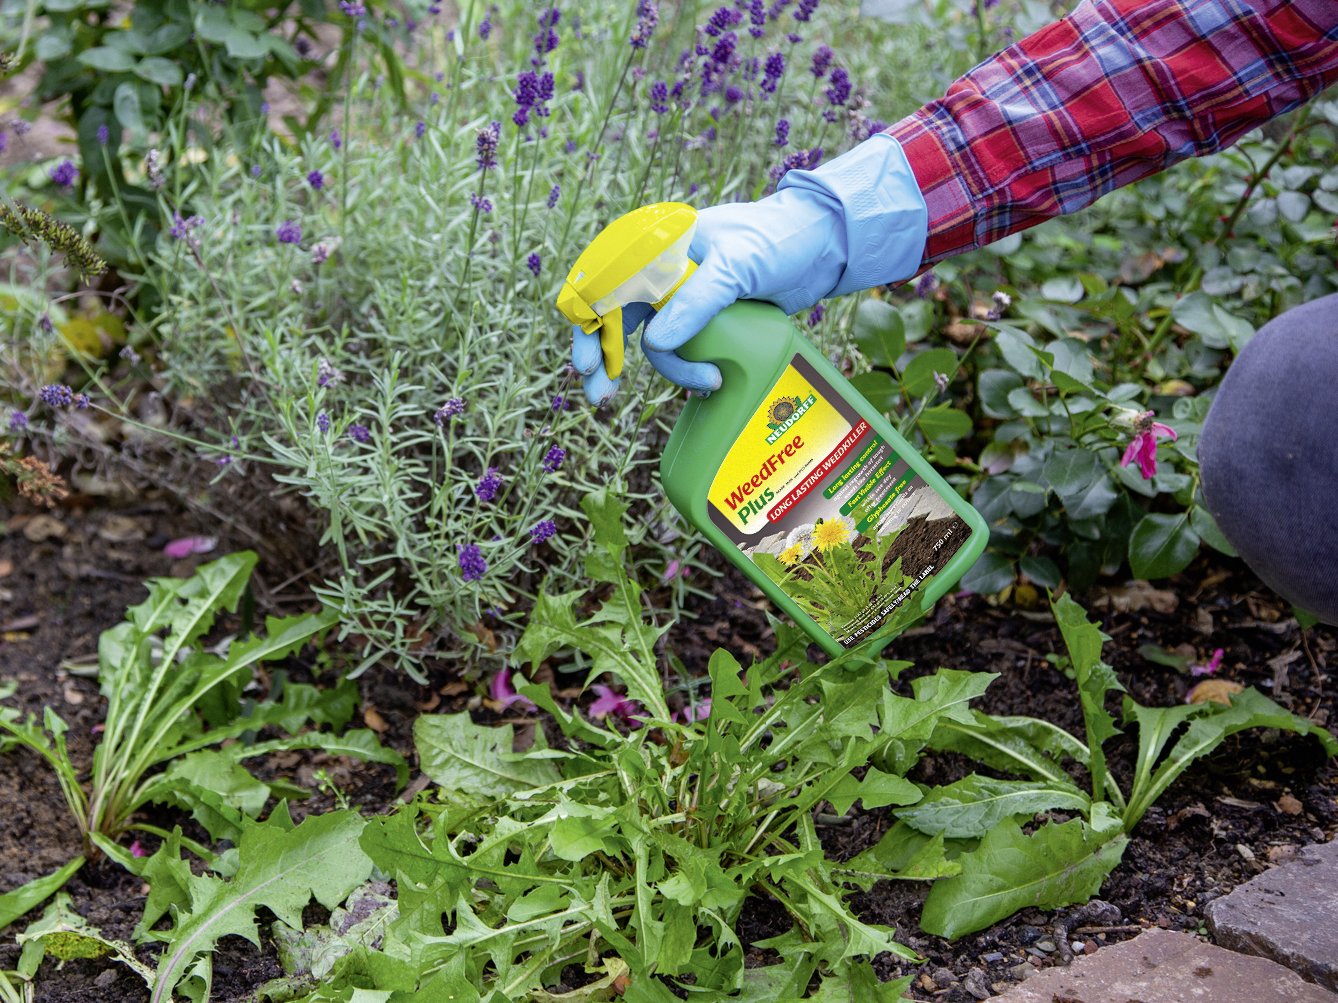 Long lasting control against regrowth of tough weeds - Glyphosate free